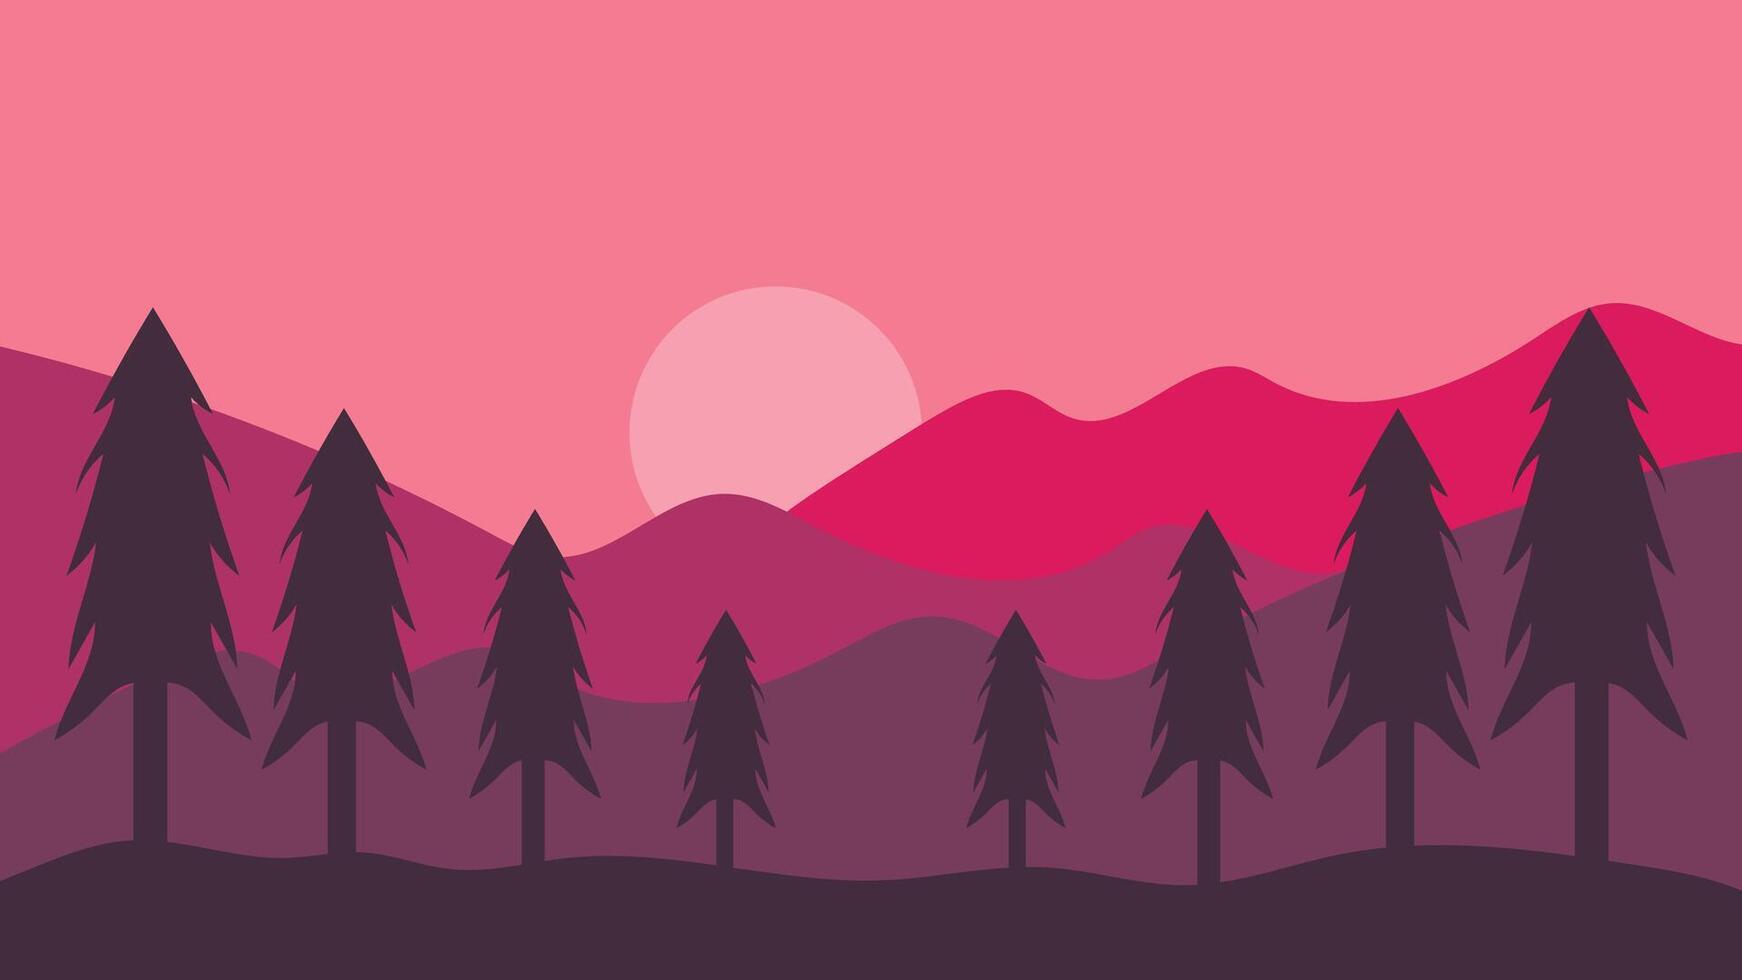 Sunset mountains landscape. pine trees and mountains silhouettes. forest background vector